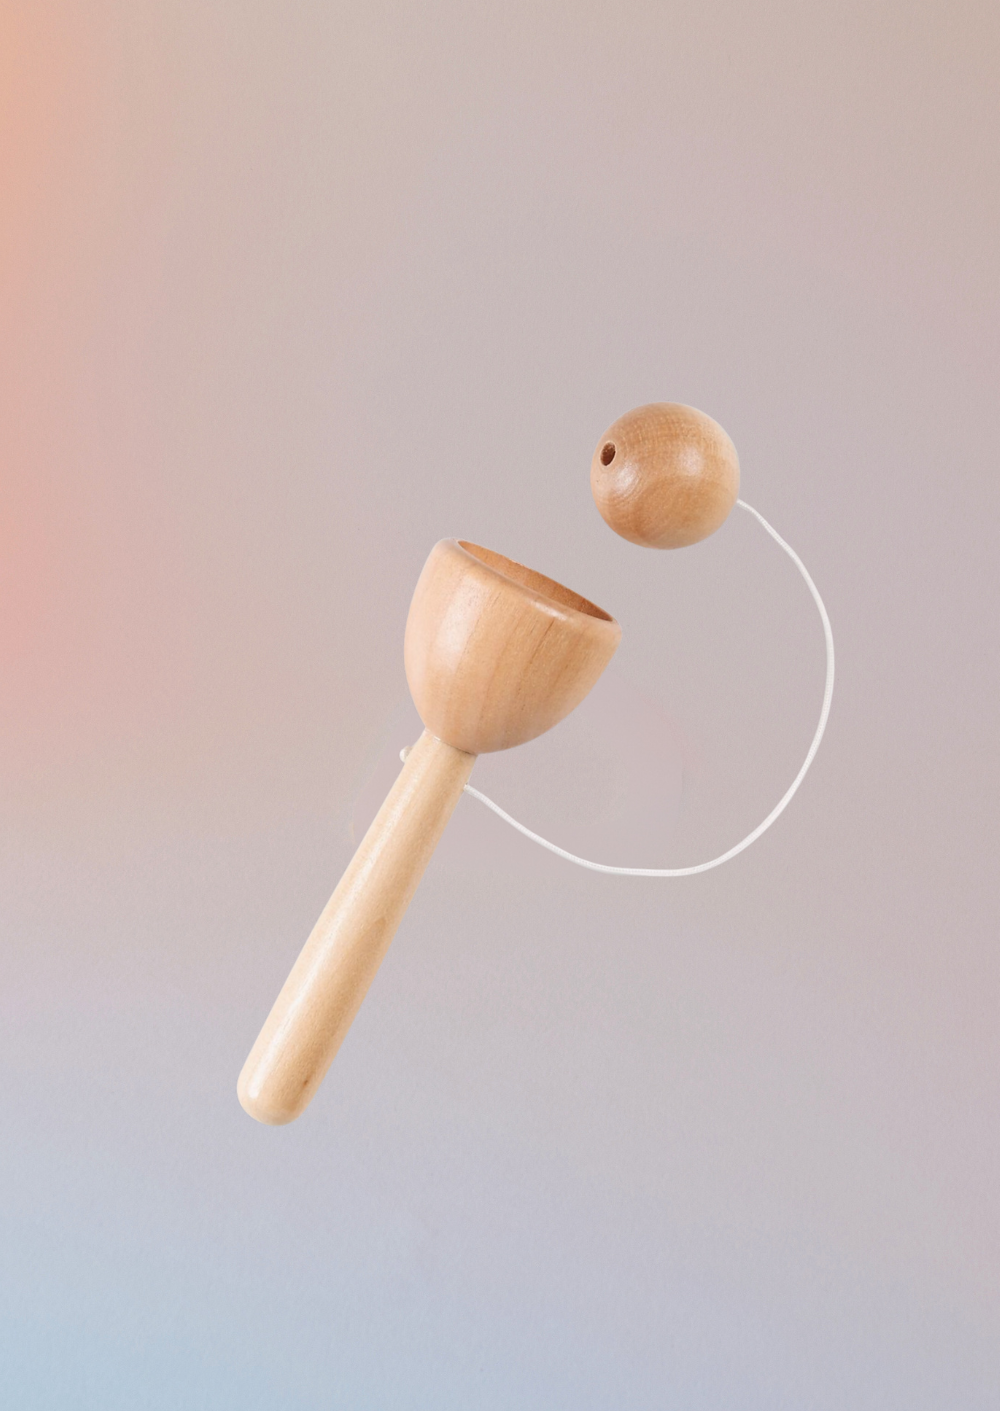 Wooden Cup & Ball Toy